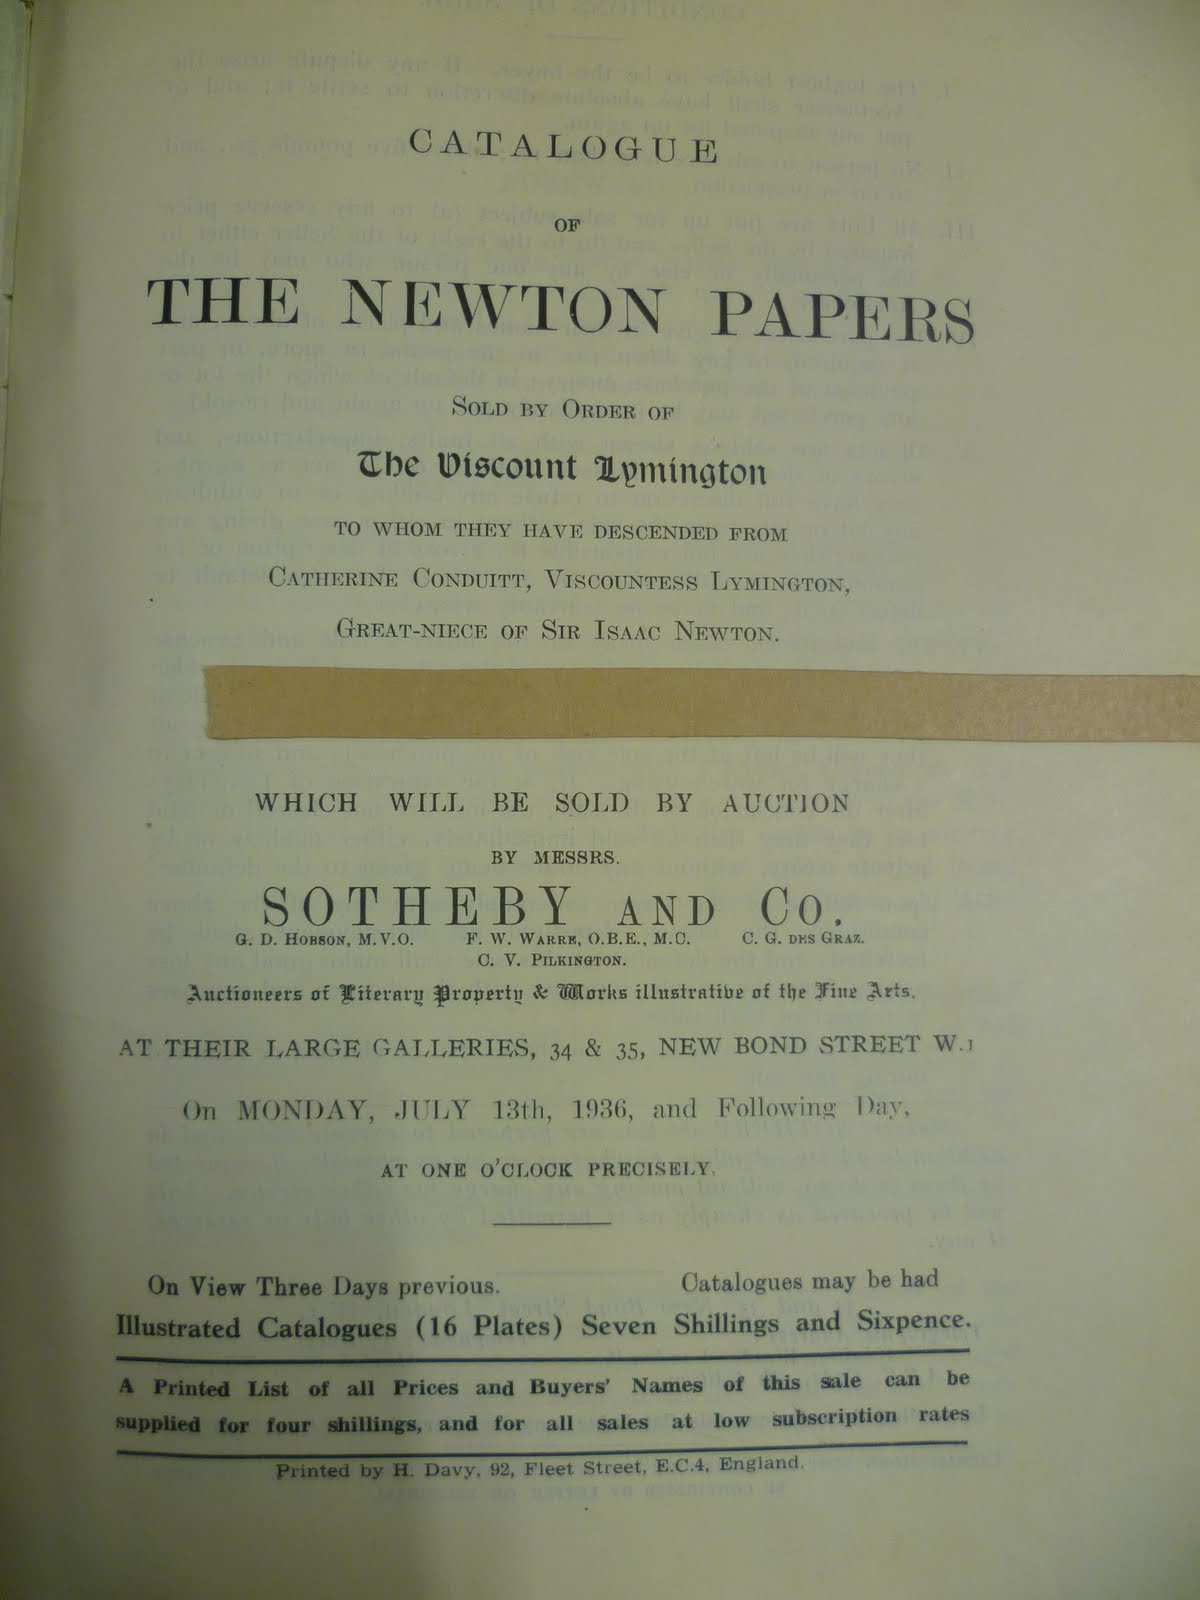 Title page of Catalogue of The Newton Papers